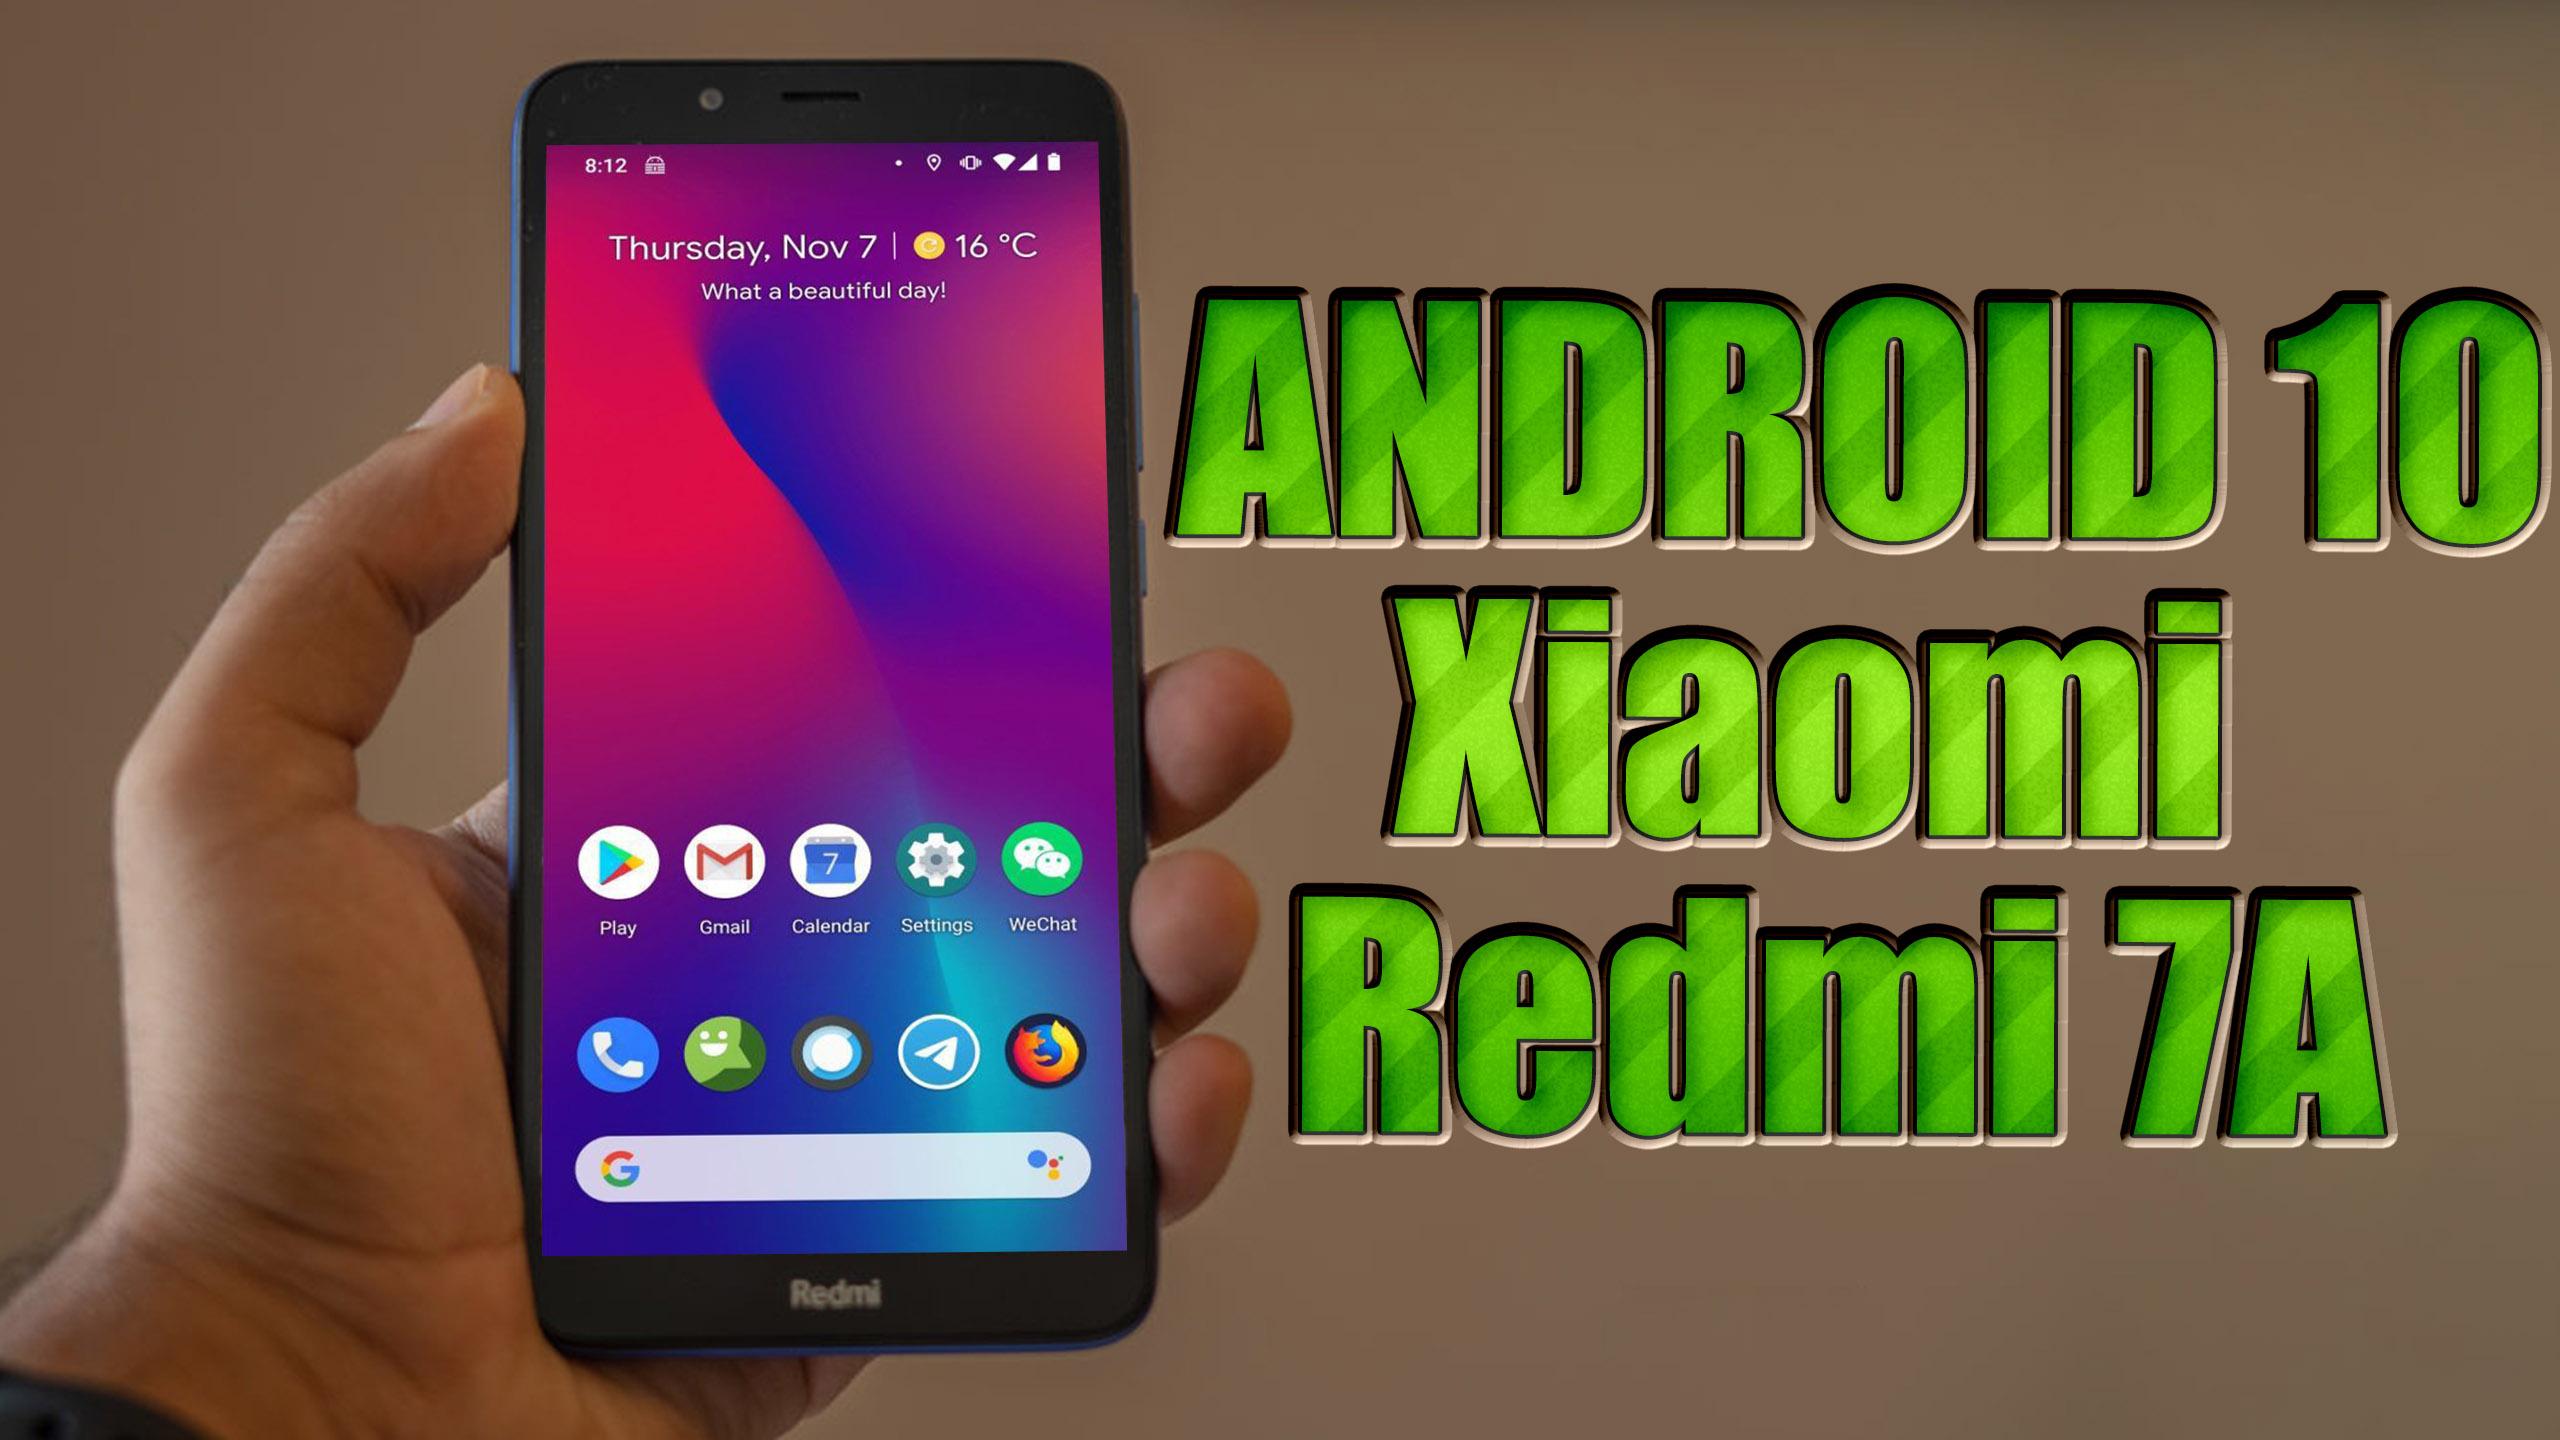 Install Android 10 on Xiaomi Redmi 7A (LineageOS 17.1) - How to Guide